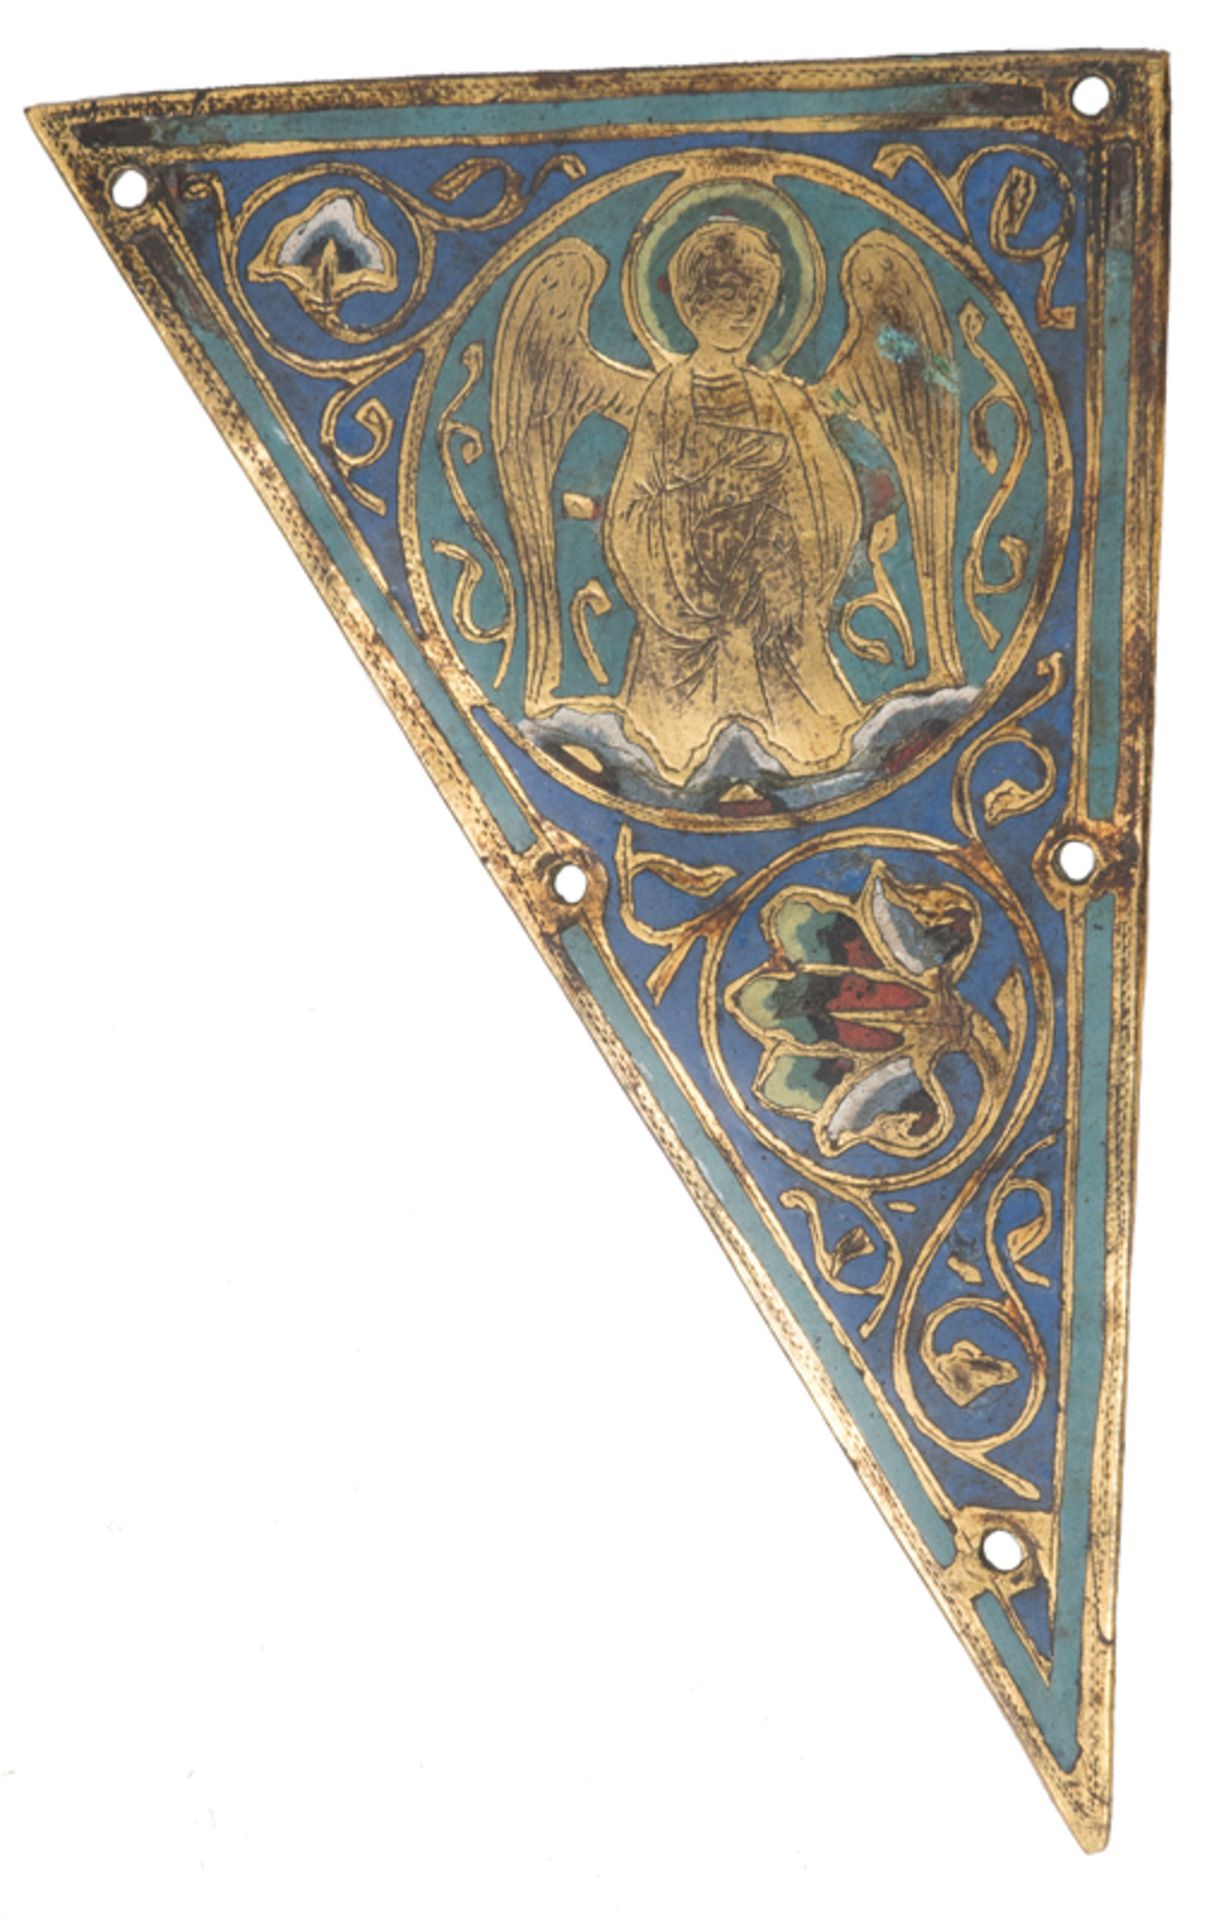 Two gilded and chased copper plaques with champlevé enamel. Limoges. France. Romanesque. c.1225-1250 - Image 3 of 6